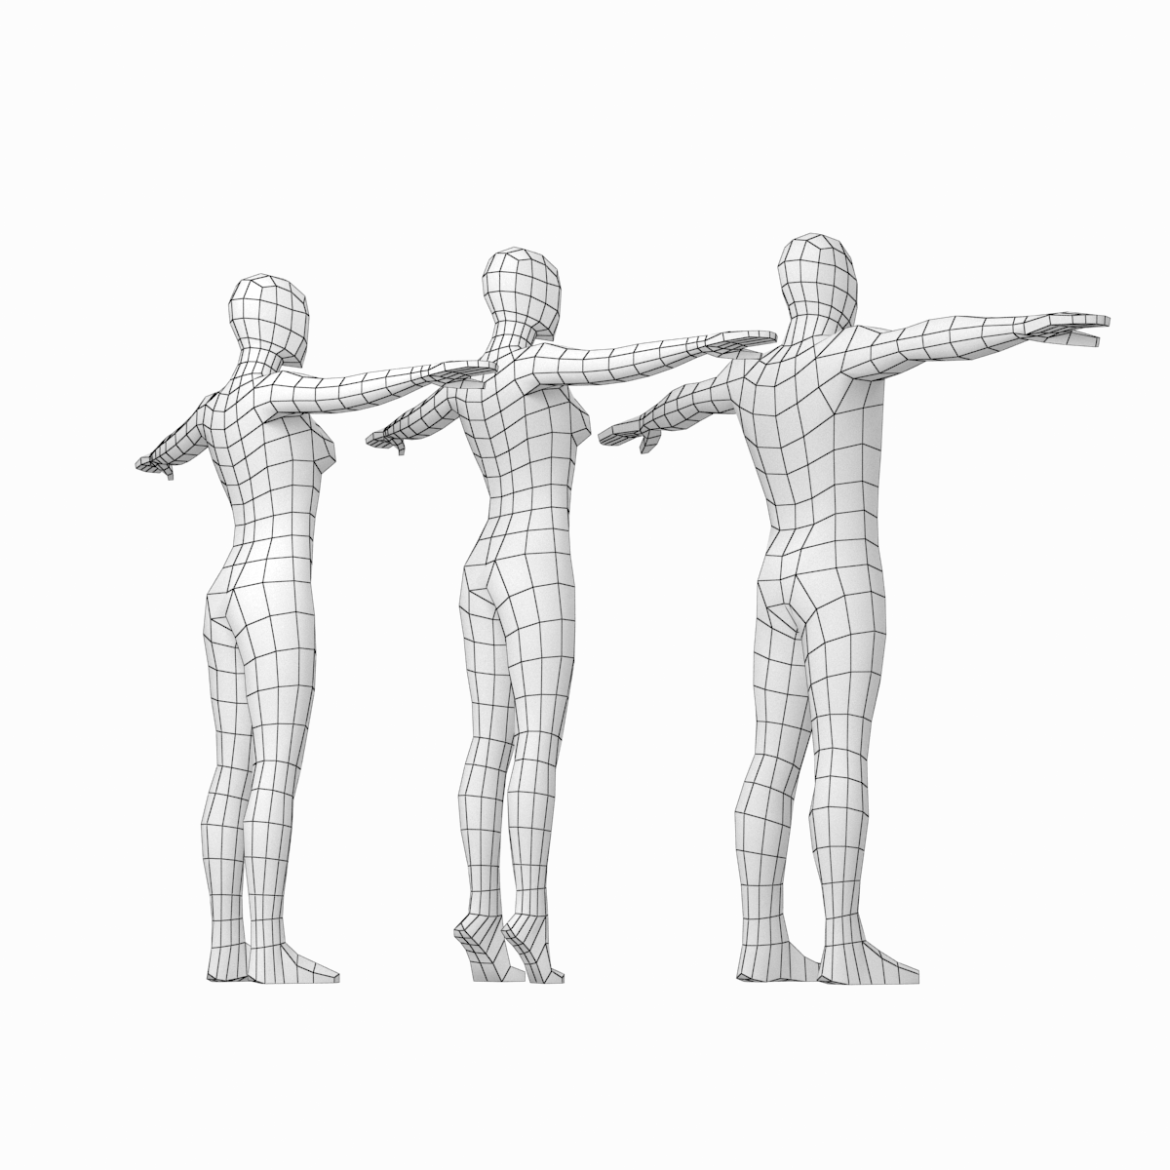  <a class="continue" href="https://www.flatpyramid.com/3d-models/characters-3d-models/characters-collections/female-and-male-base-mesh-in-t-pose/">Continue Reading<span> Female and Male Base Mesh in T-Pose</span></a>